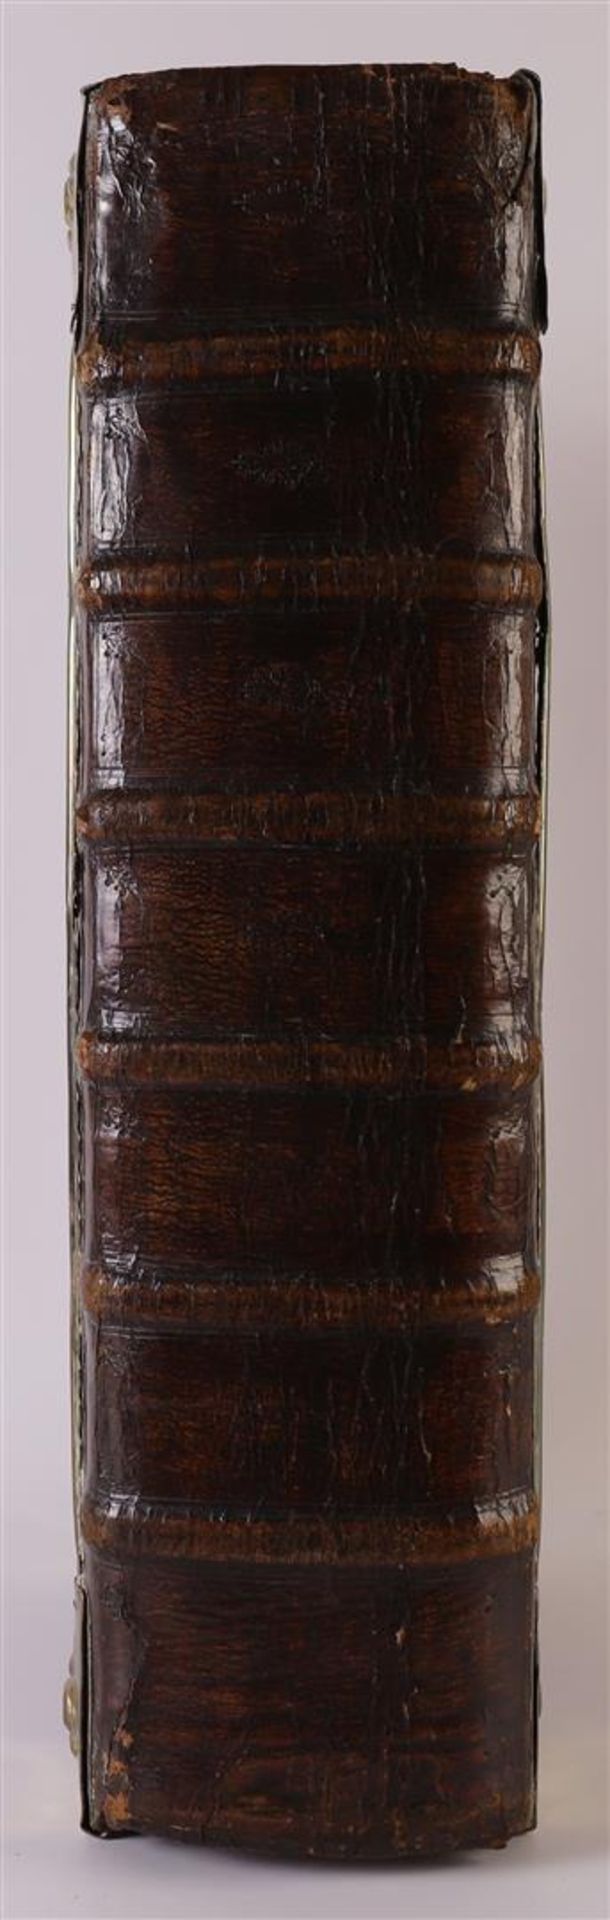 A State Bible in original brown leather binding with brass fittings and clasps, heirs Paulus Aertsz. - Image 3 of 12